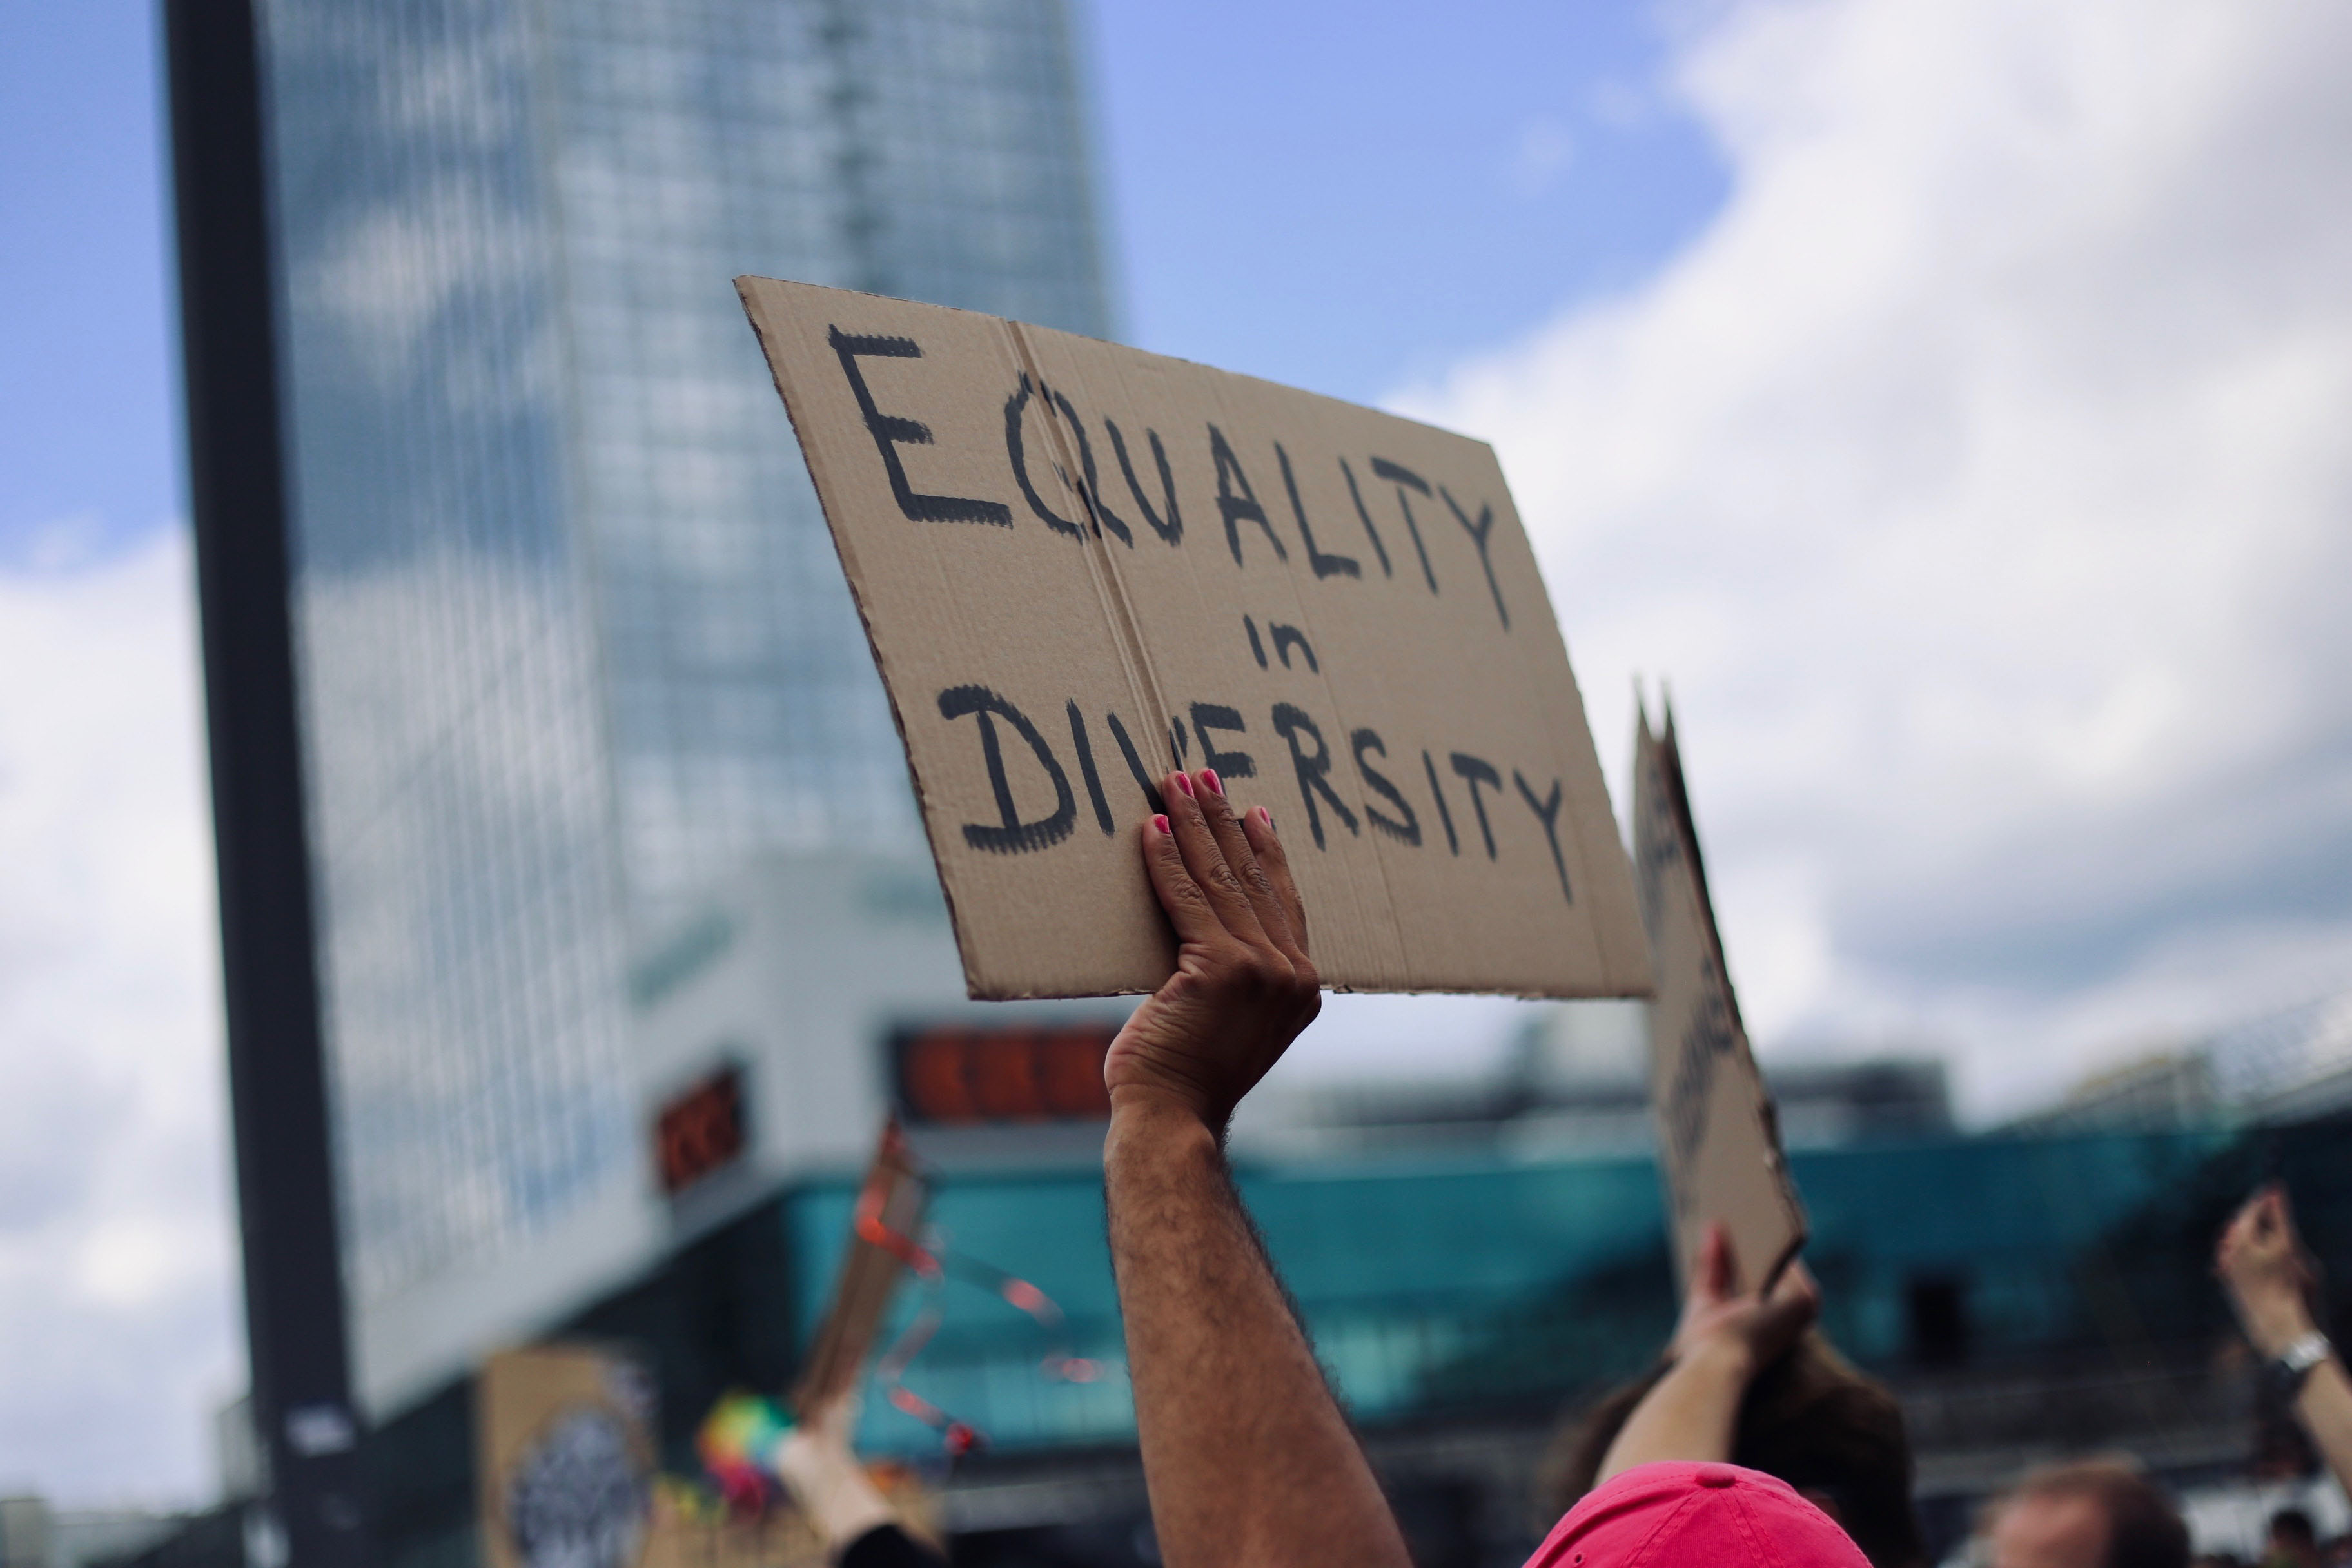 A person is holding a sign that reads "equality in diversity"